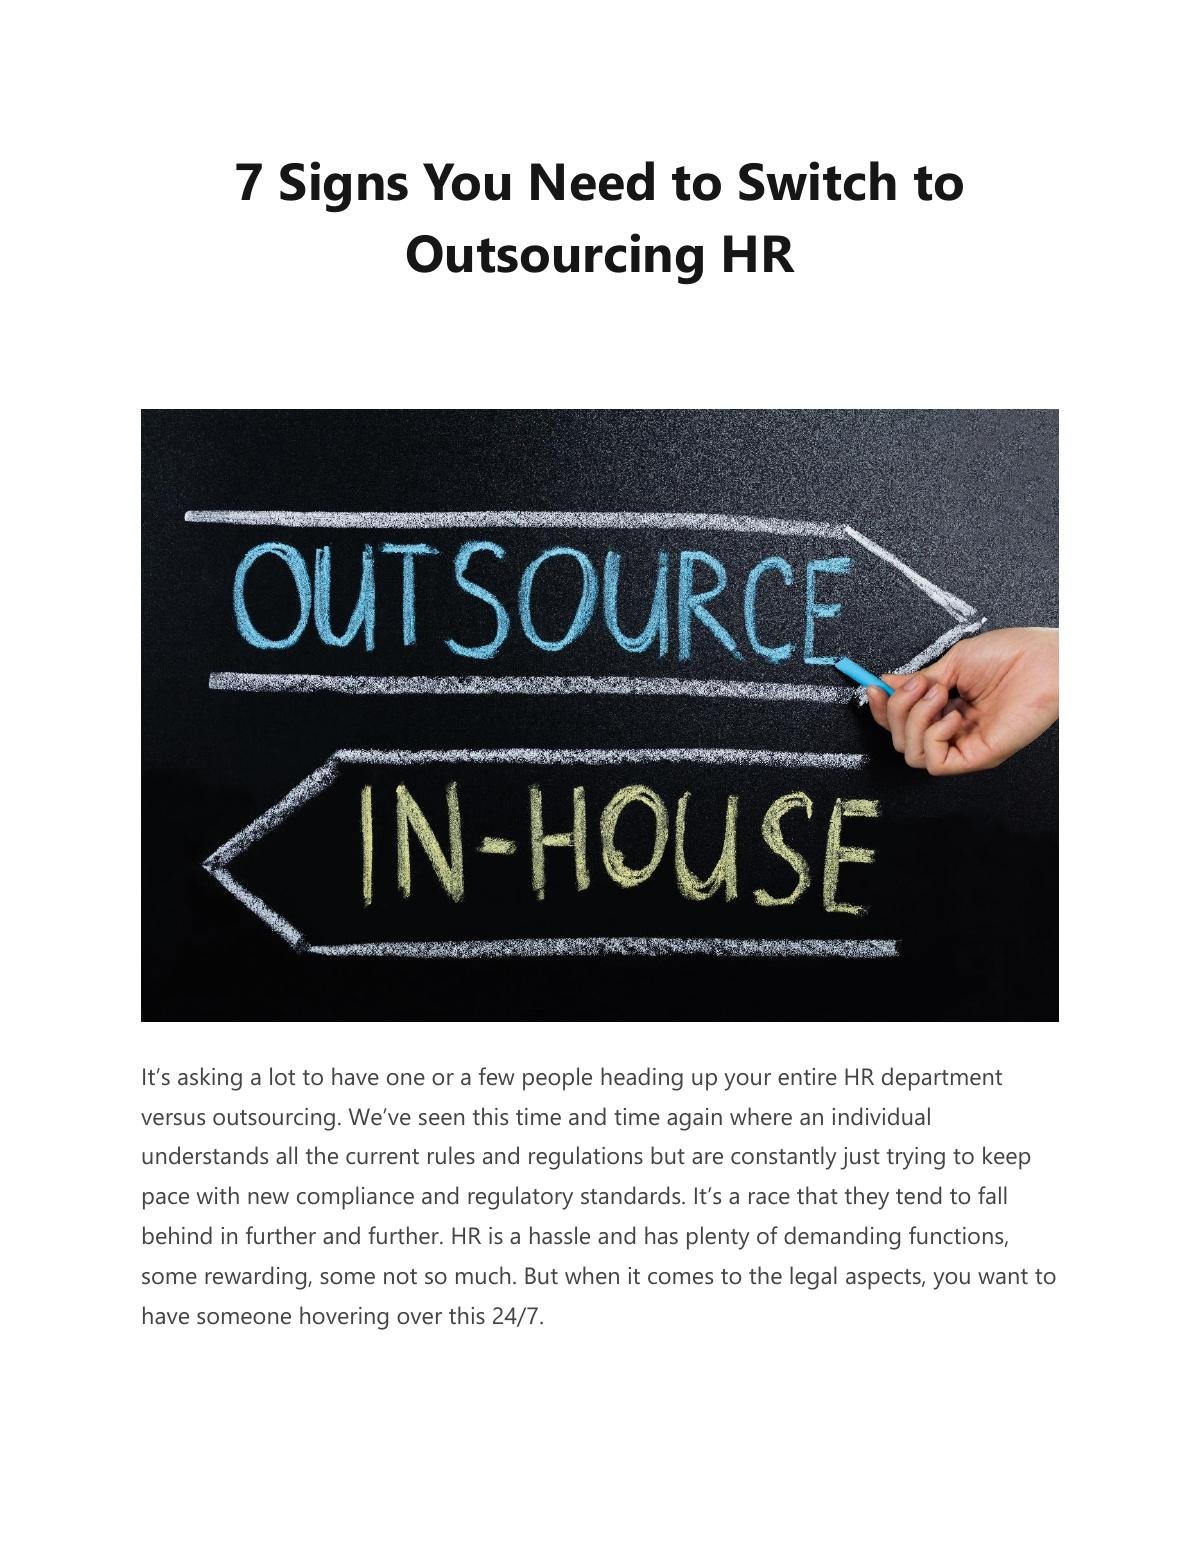 7 Signs You Need to Switch to Outsourcing HR 